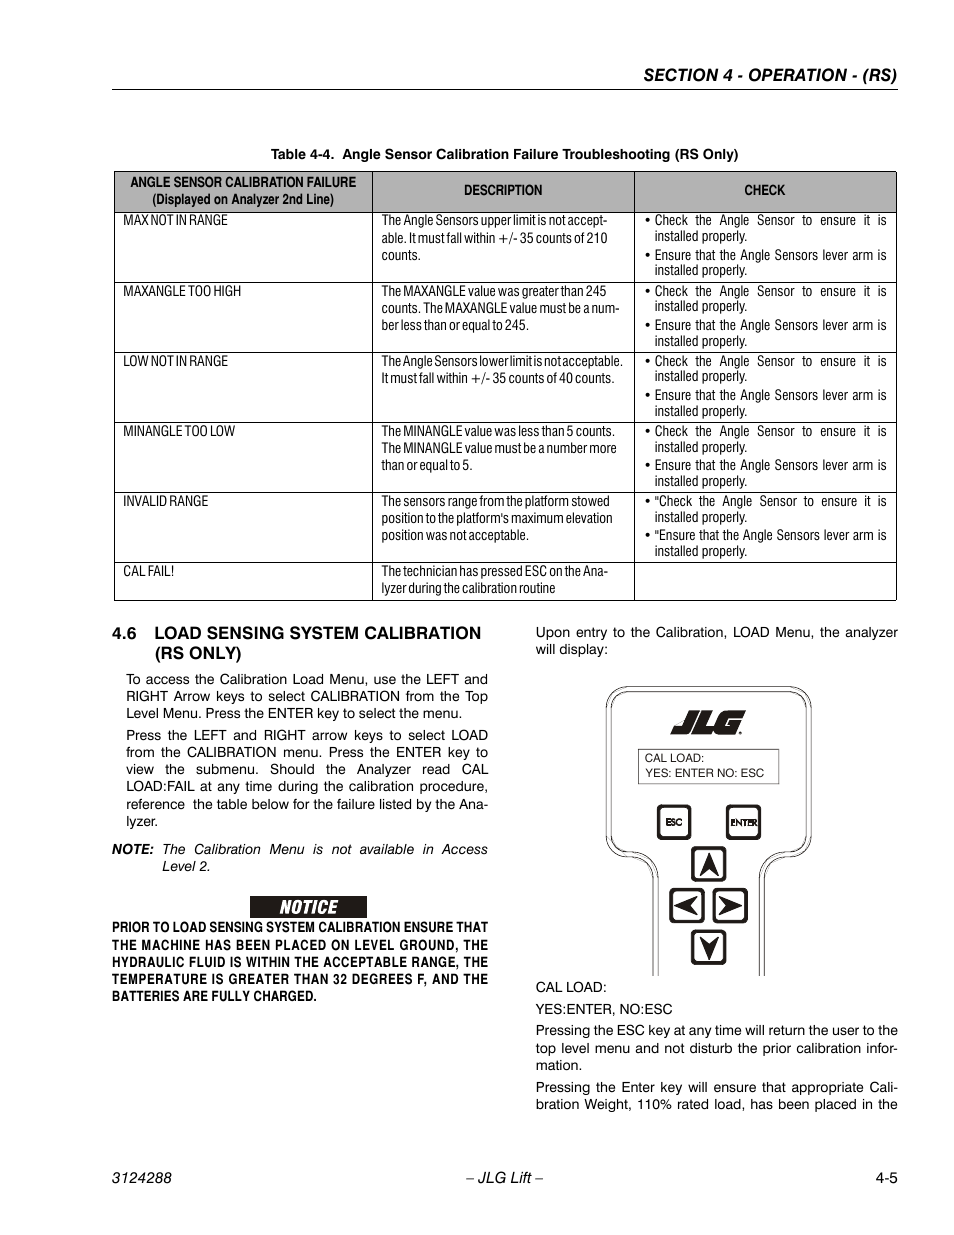 6 load sensing system calibration (rs only), Load sensing system calibration (rs only) -5 | JLG LSS Scissors User Manual | Page 33 / 78